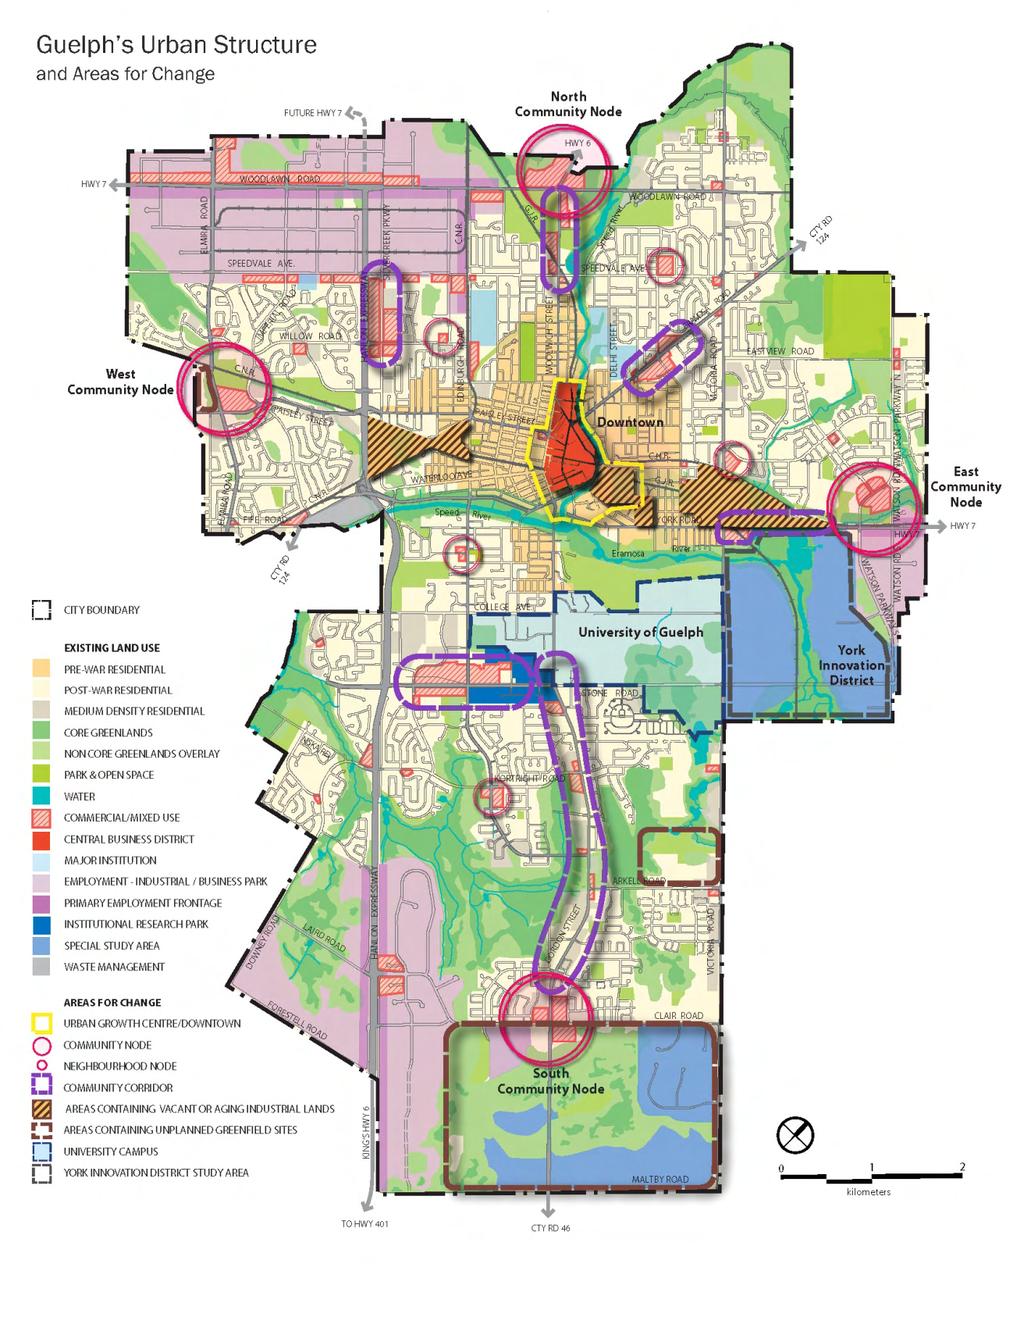 Opportunity Areas Downtown Community Nodes Intensification Corridors New Communities